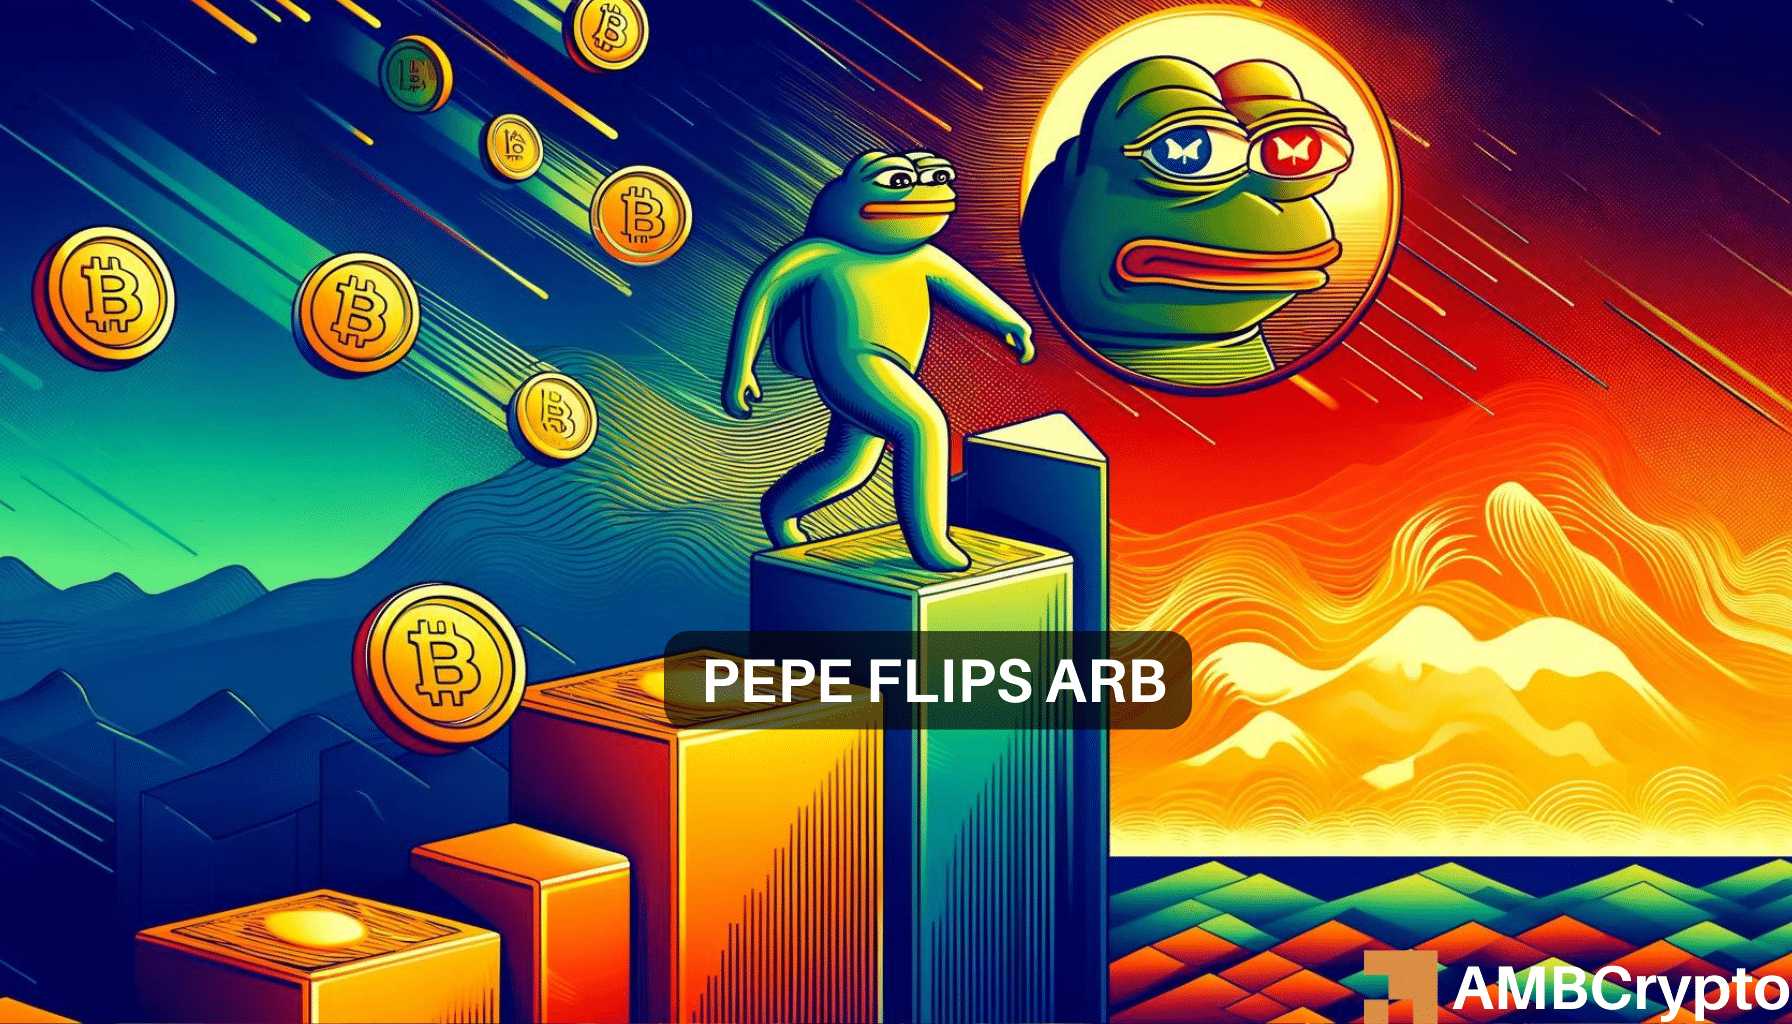 PEPE flips ARB: A Fluke or start of a new trend?